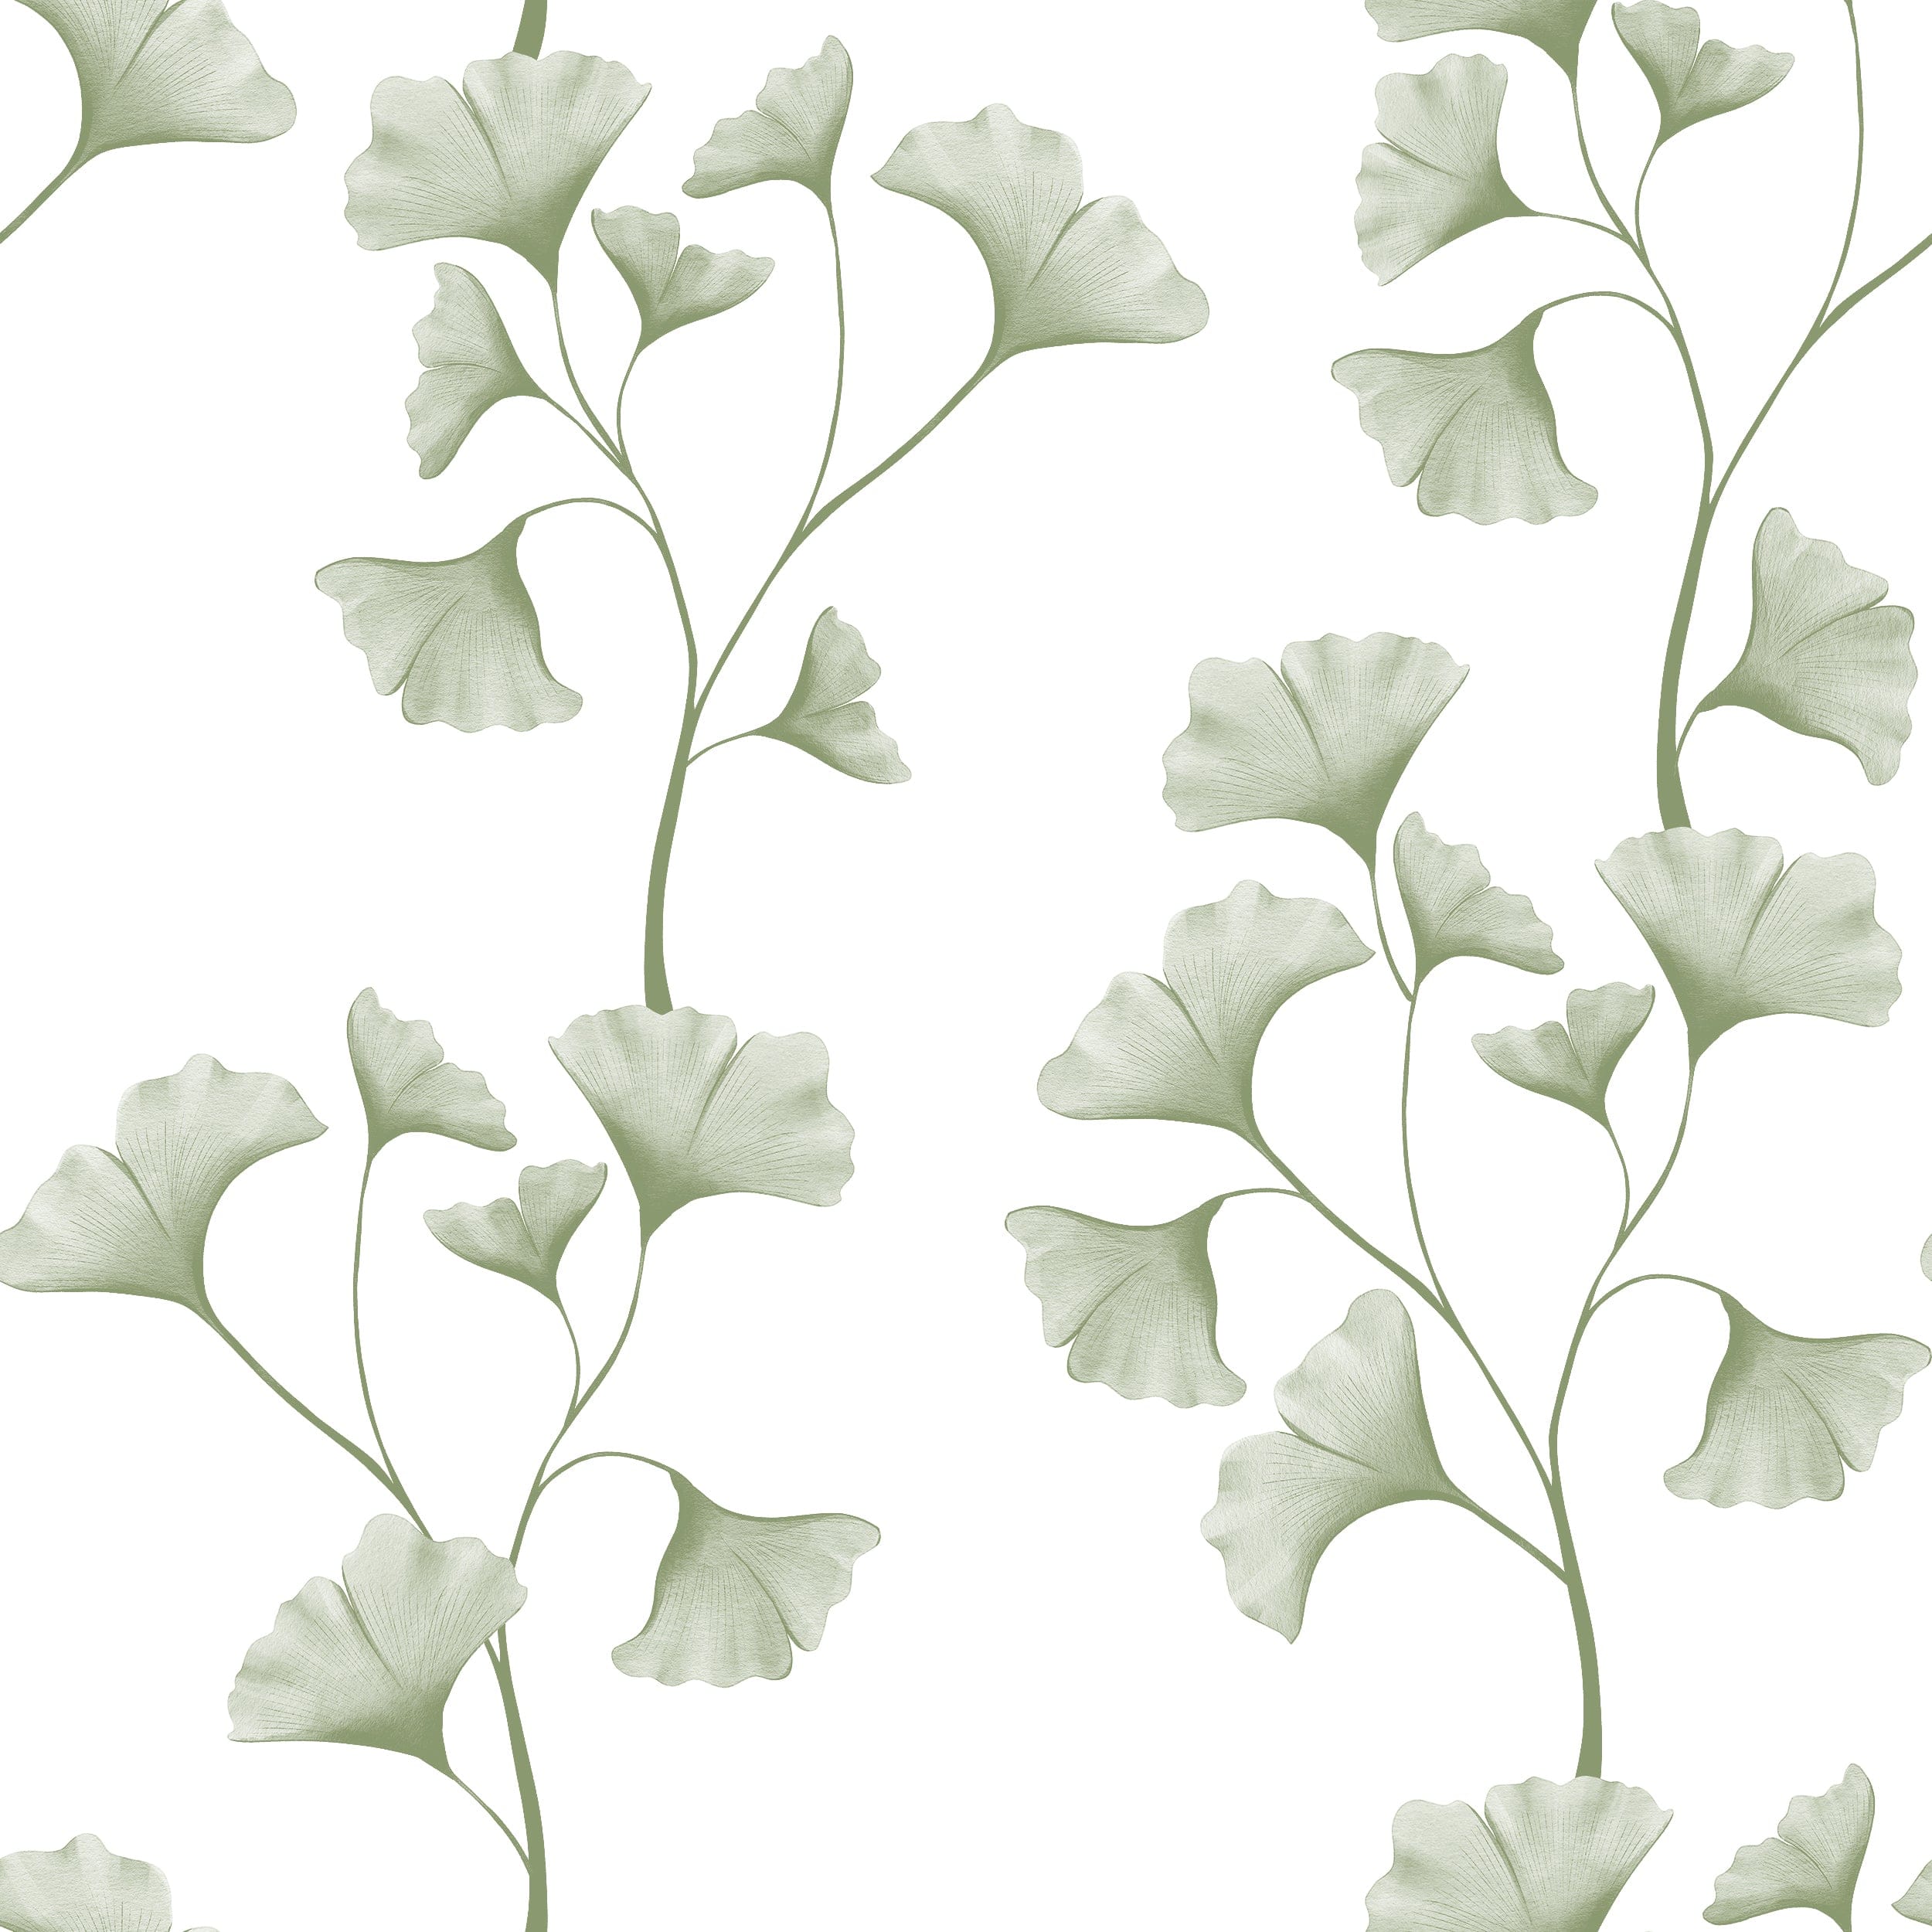 Close-up of the Botanical Vines Wallpaper, showing off the detailed and artistic rendering of climbing vines with large, soft green leaves. The creamy background provides a subtle contrast that highlights the gentle curves of the vine patterns.